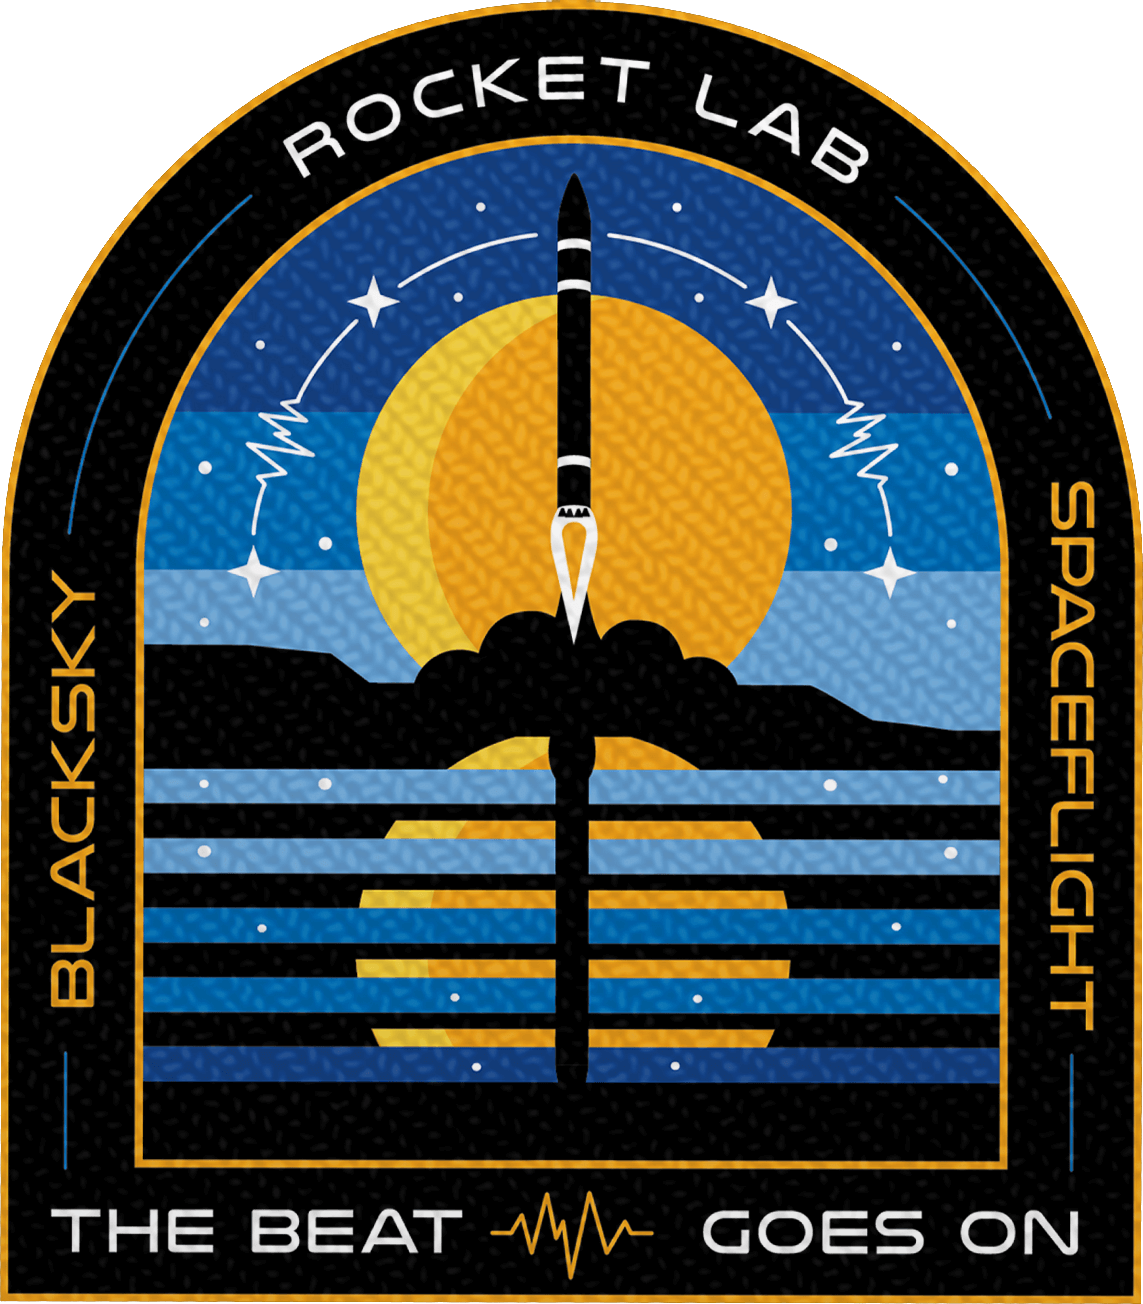 Mission patch for The Beat Goes On